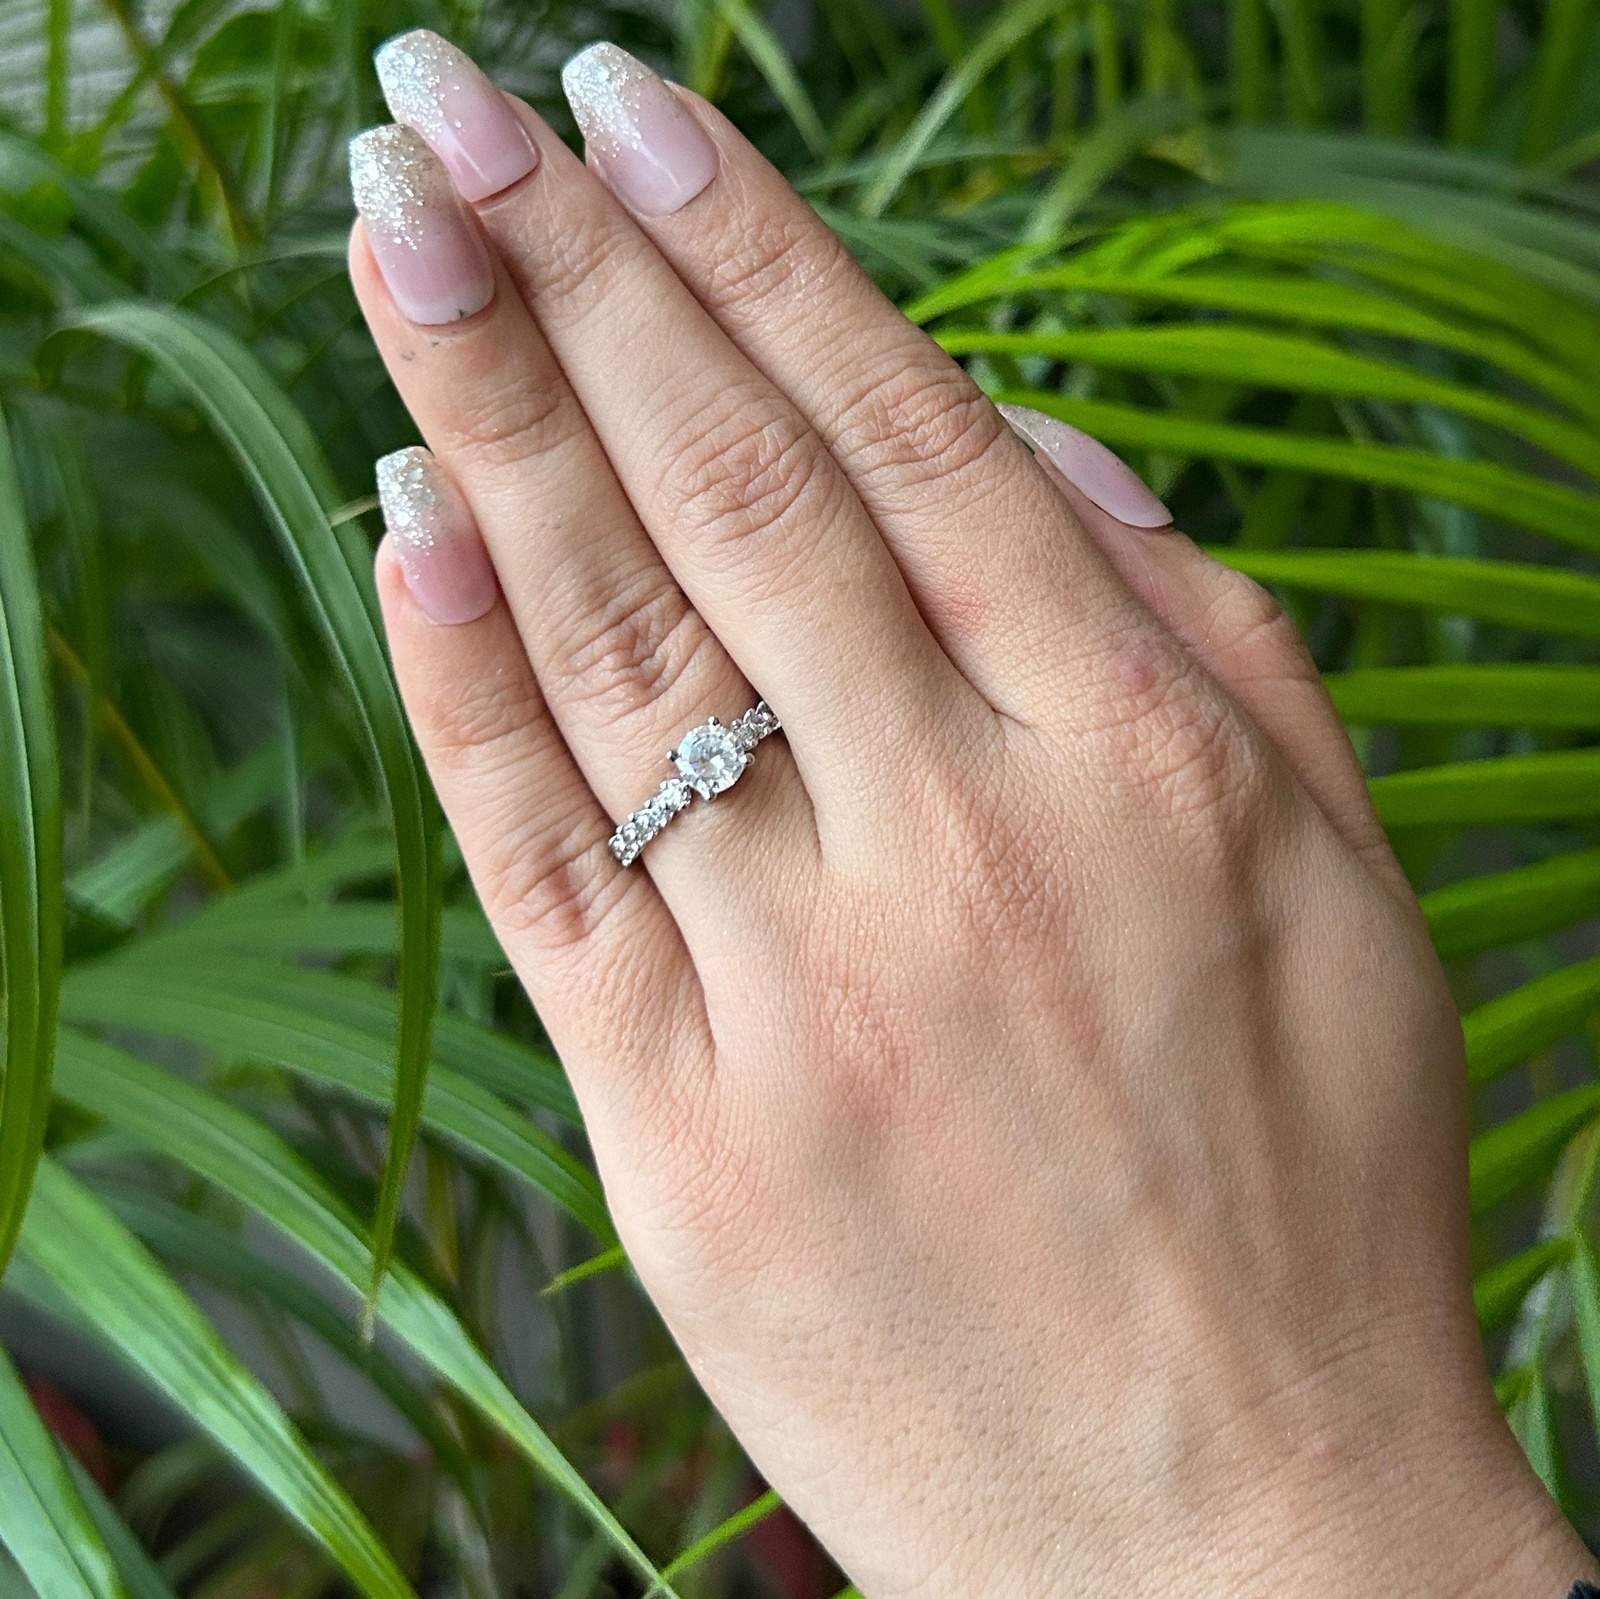 Vs sterling silver cocktail ring 124